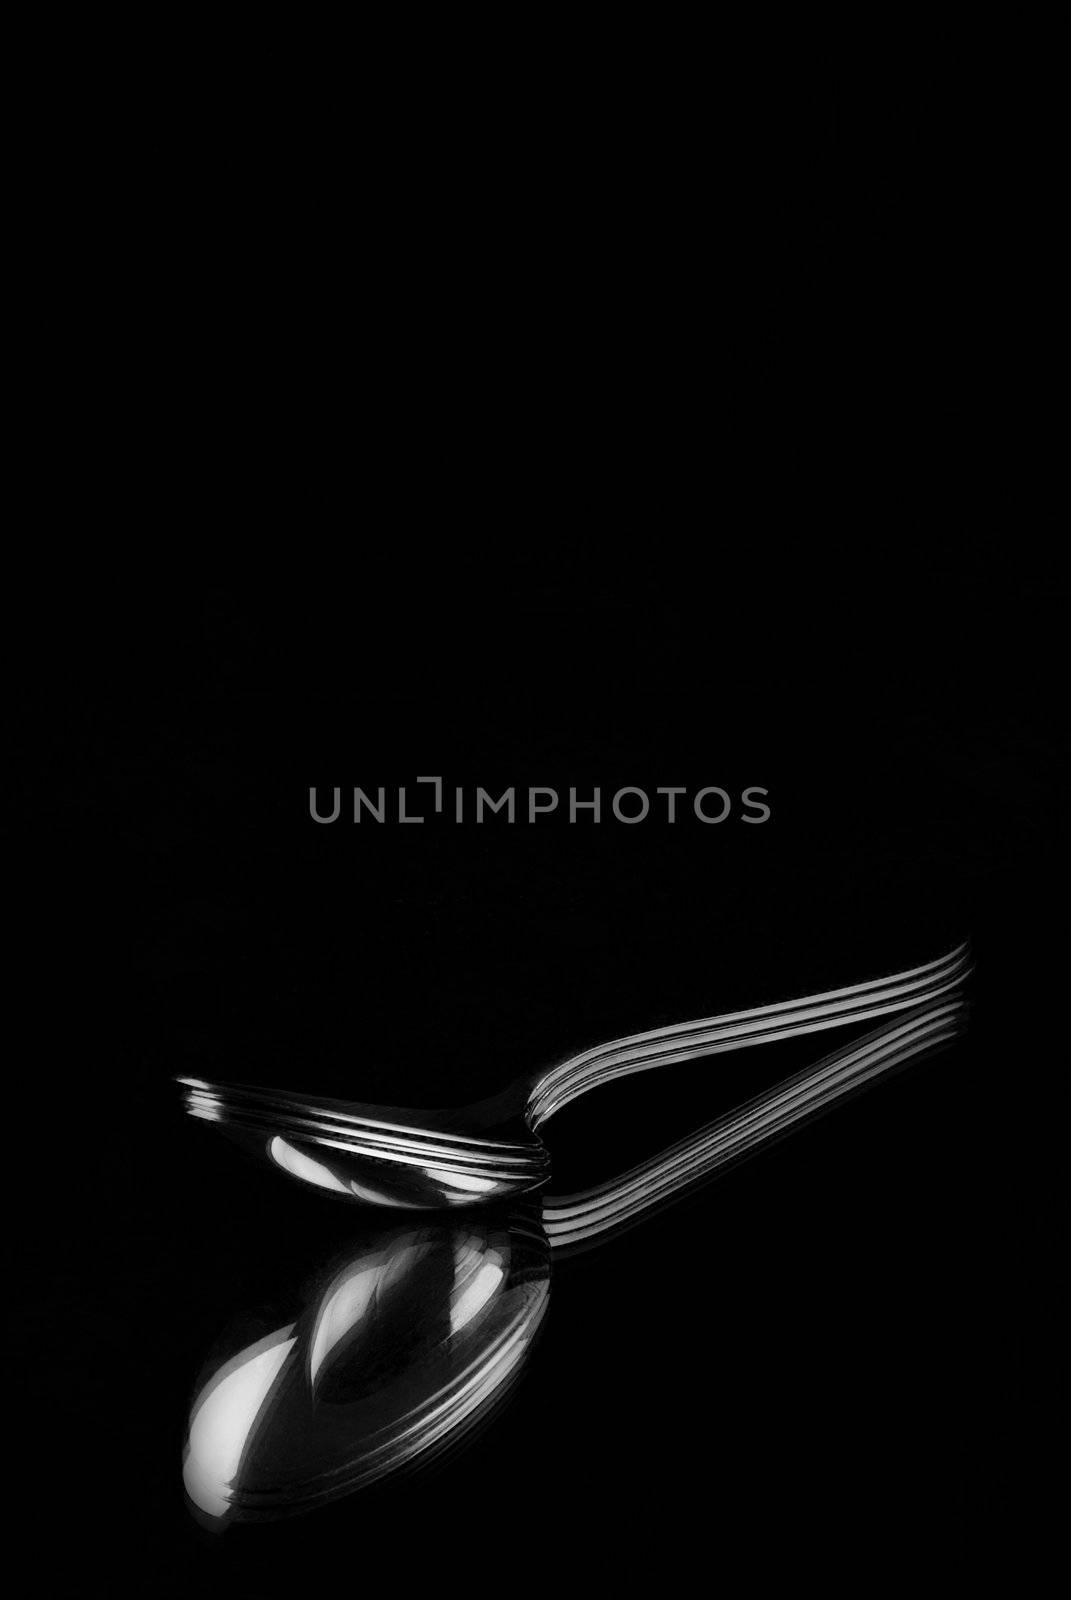 Silver spoons reflecting in mirror with a black background